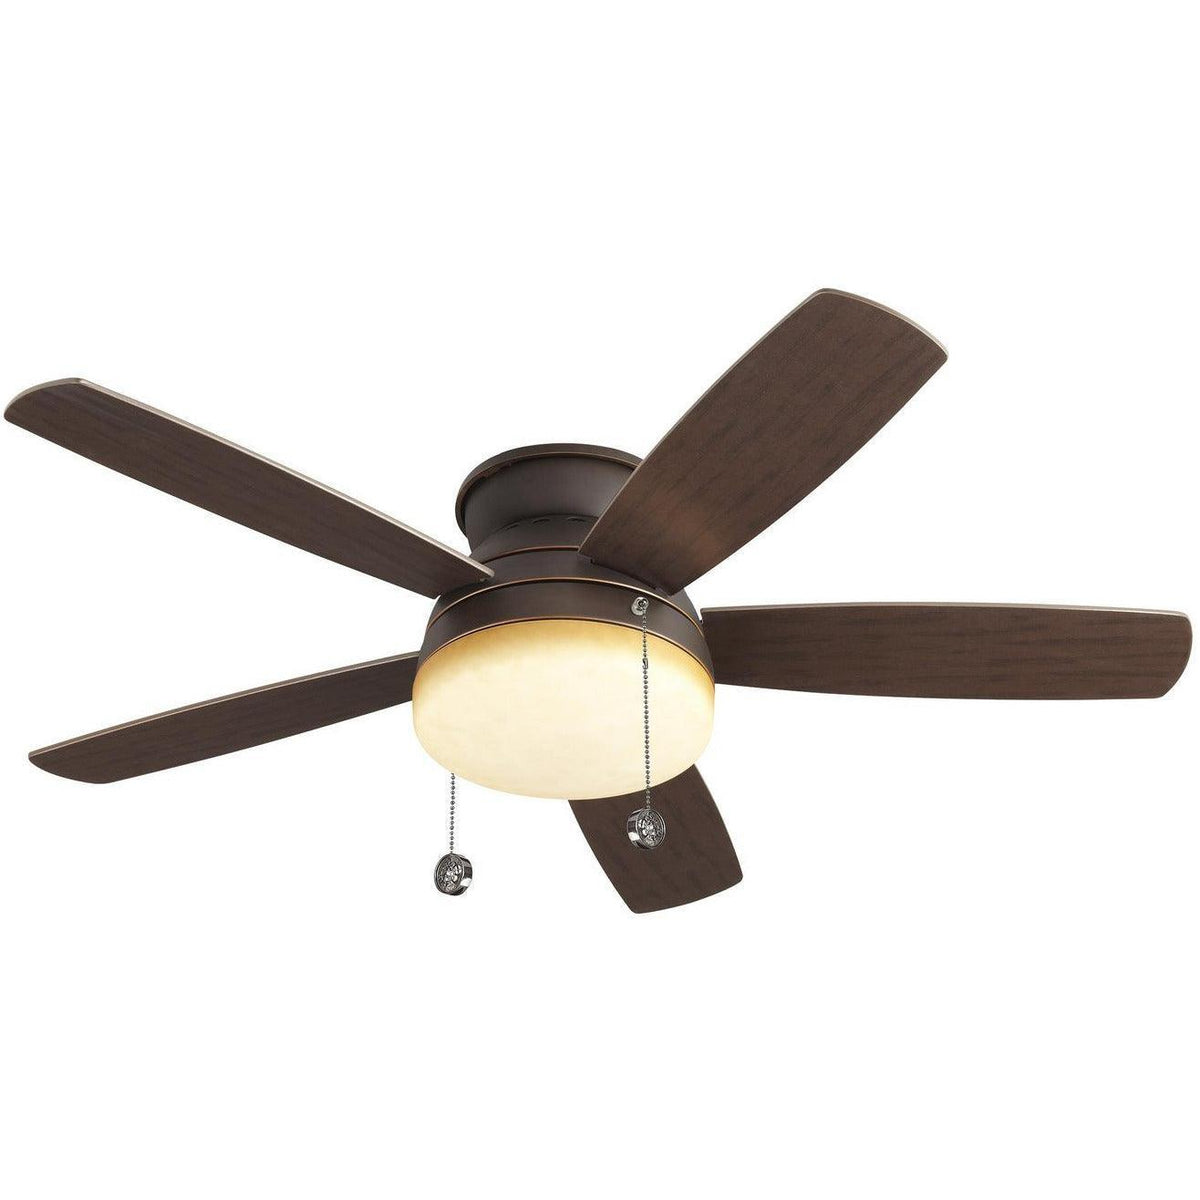 Visual Comfort Fan Collection - Traverse 52" Ceiling Fan - 5TV52RBD-V1 | Montreal Lighting & Hardware